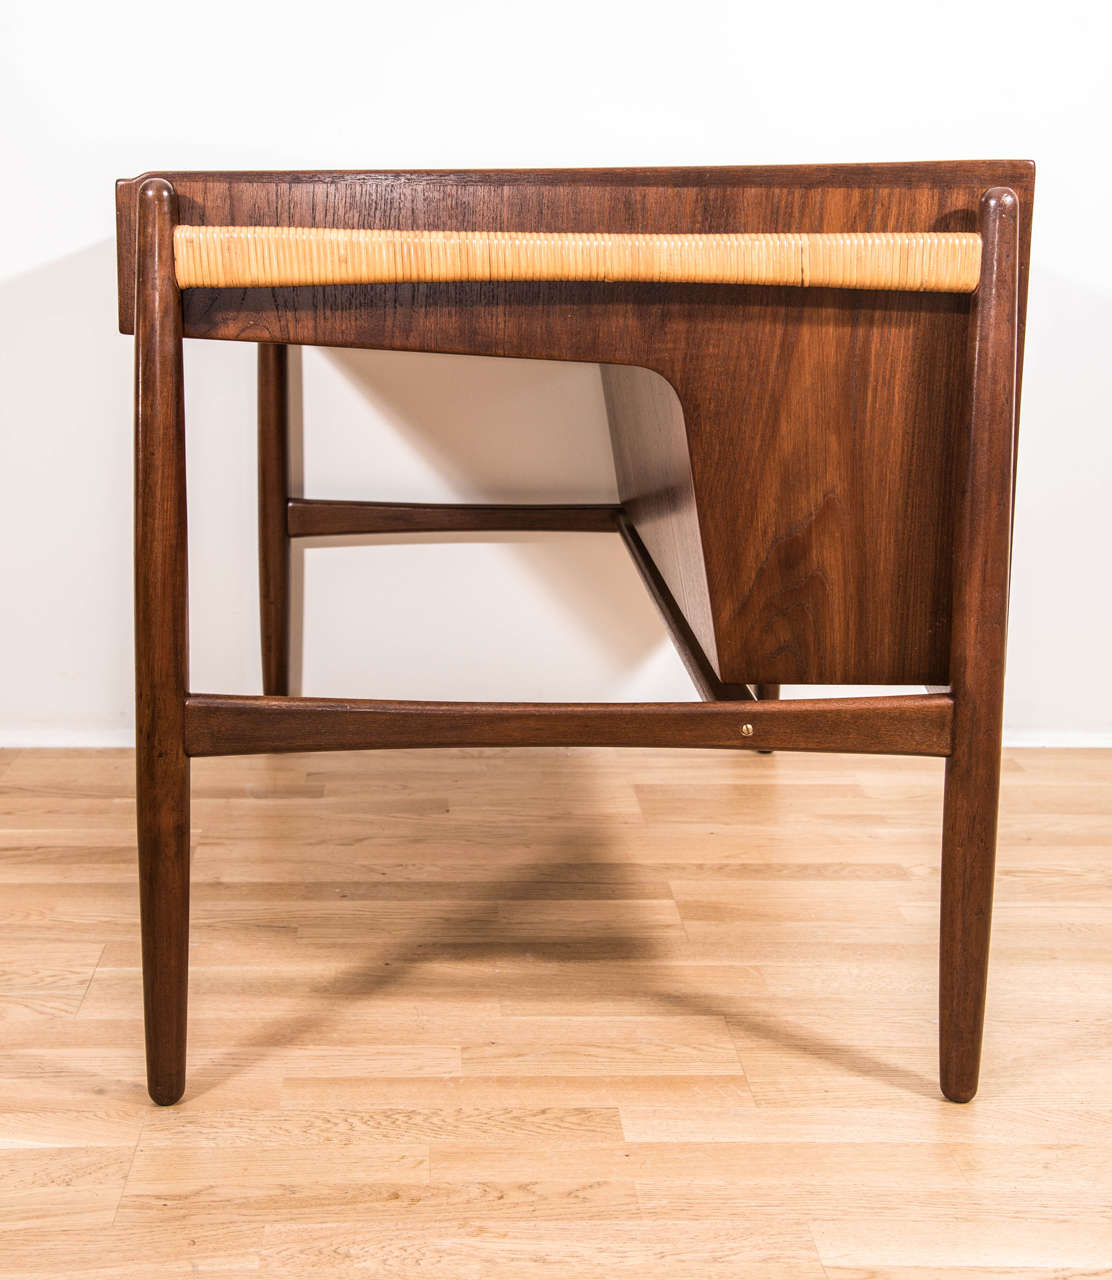 A gorgeous and unique designed writing desk in teak wood with cane wrapped side arms,
open back storage and finished in a rich walnut color..